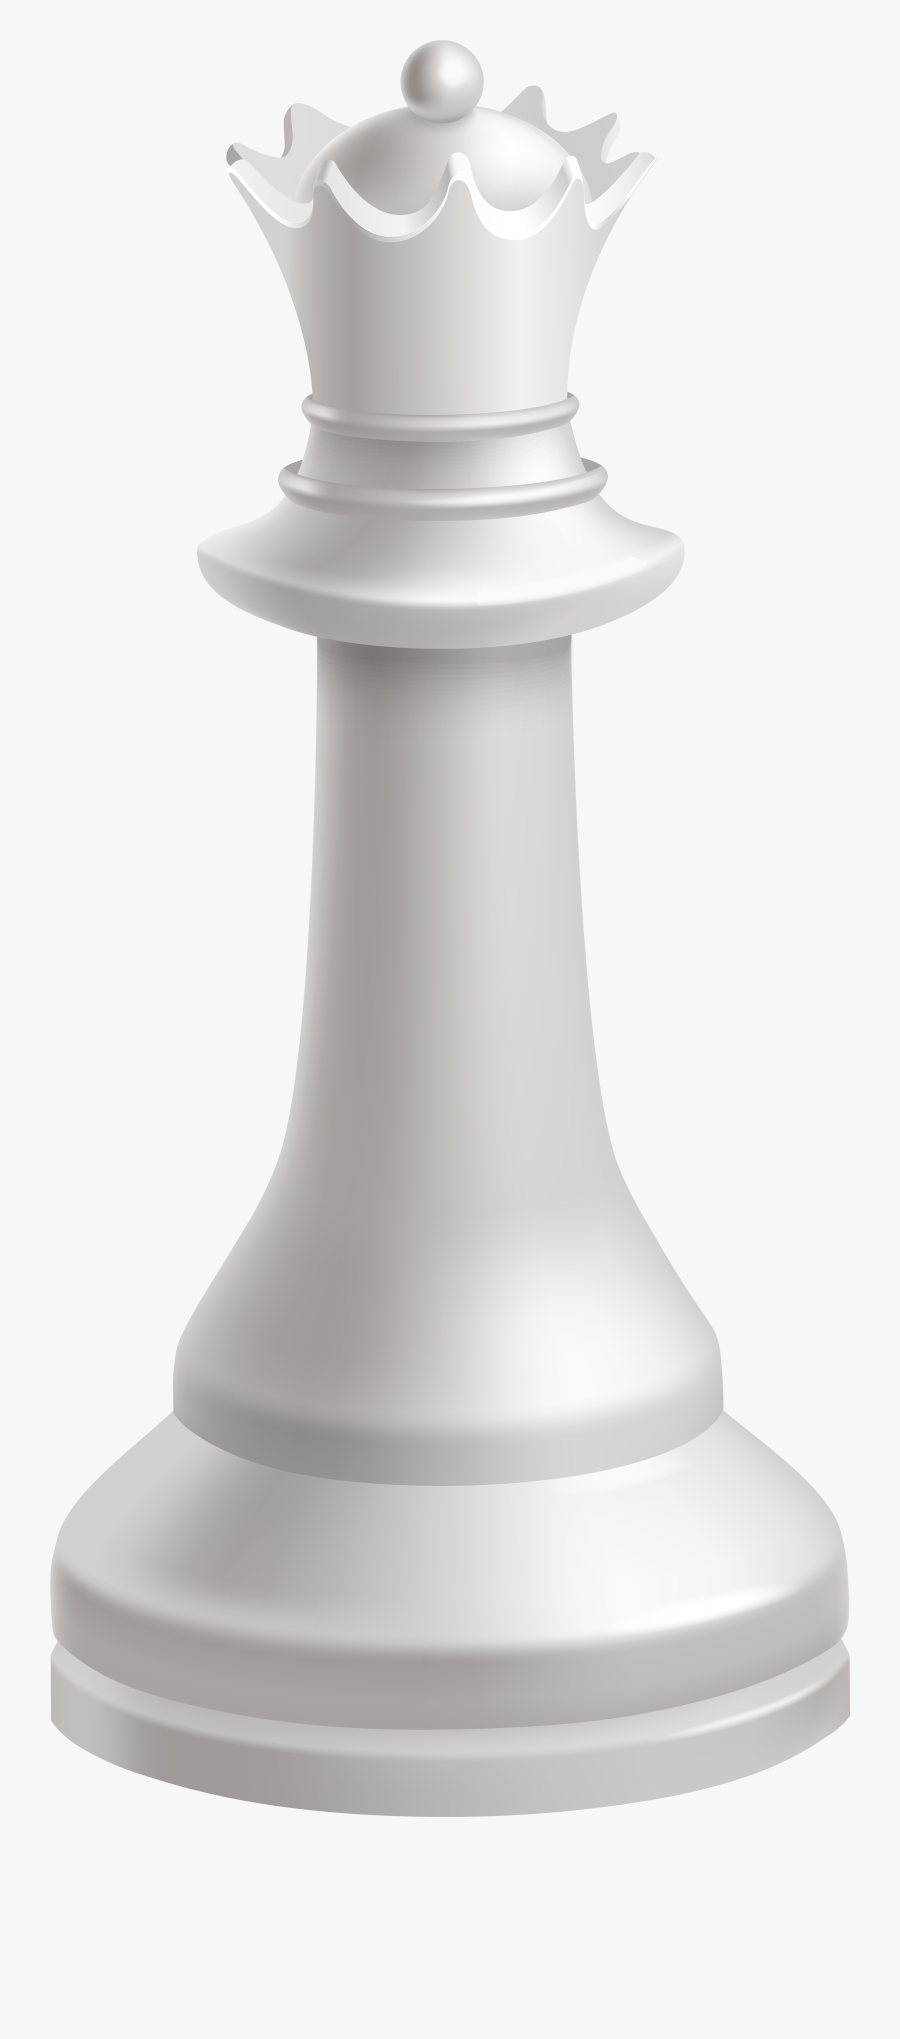 Queen White Chess Piece Png Clip Art - White Chess Pieces Png, Transparent Clipart